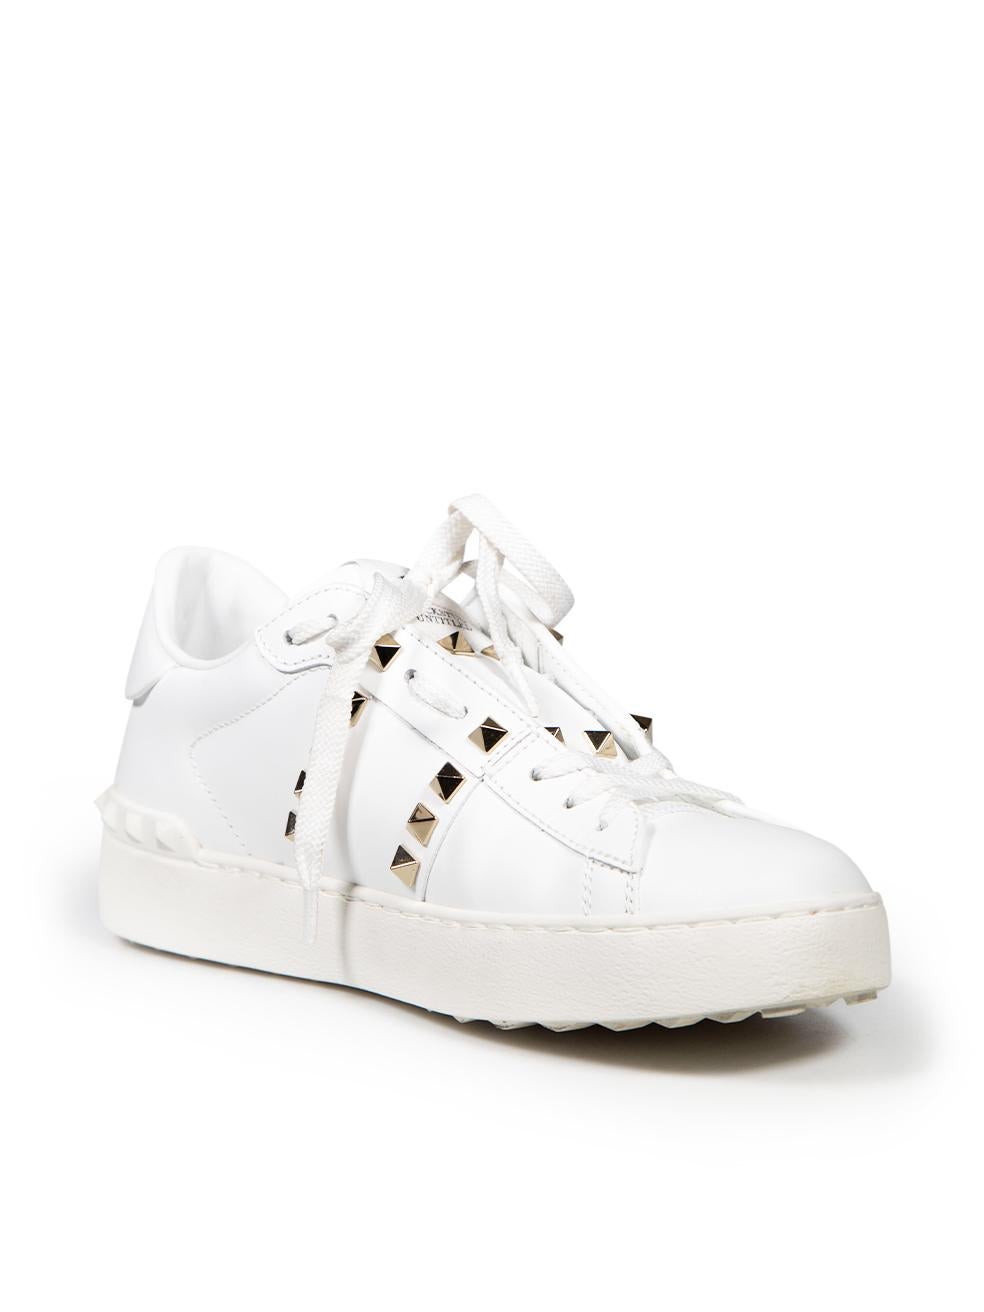 CONDITION is Very good. Minimal wear to trainers is evident. Minimal discolouration to tip of left rubber sole as well as the both fabric tab of tongue on this used Valentino Garavani designer resale item.
 
 
 
 Details
 
 
 Model: Untitled
 
